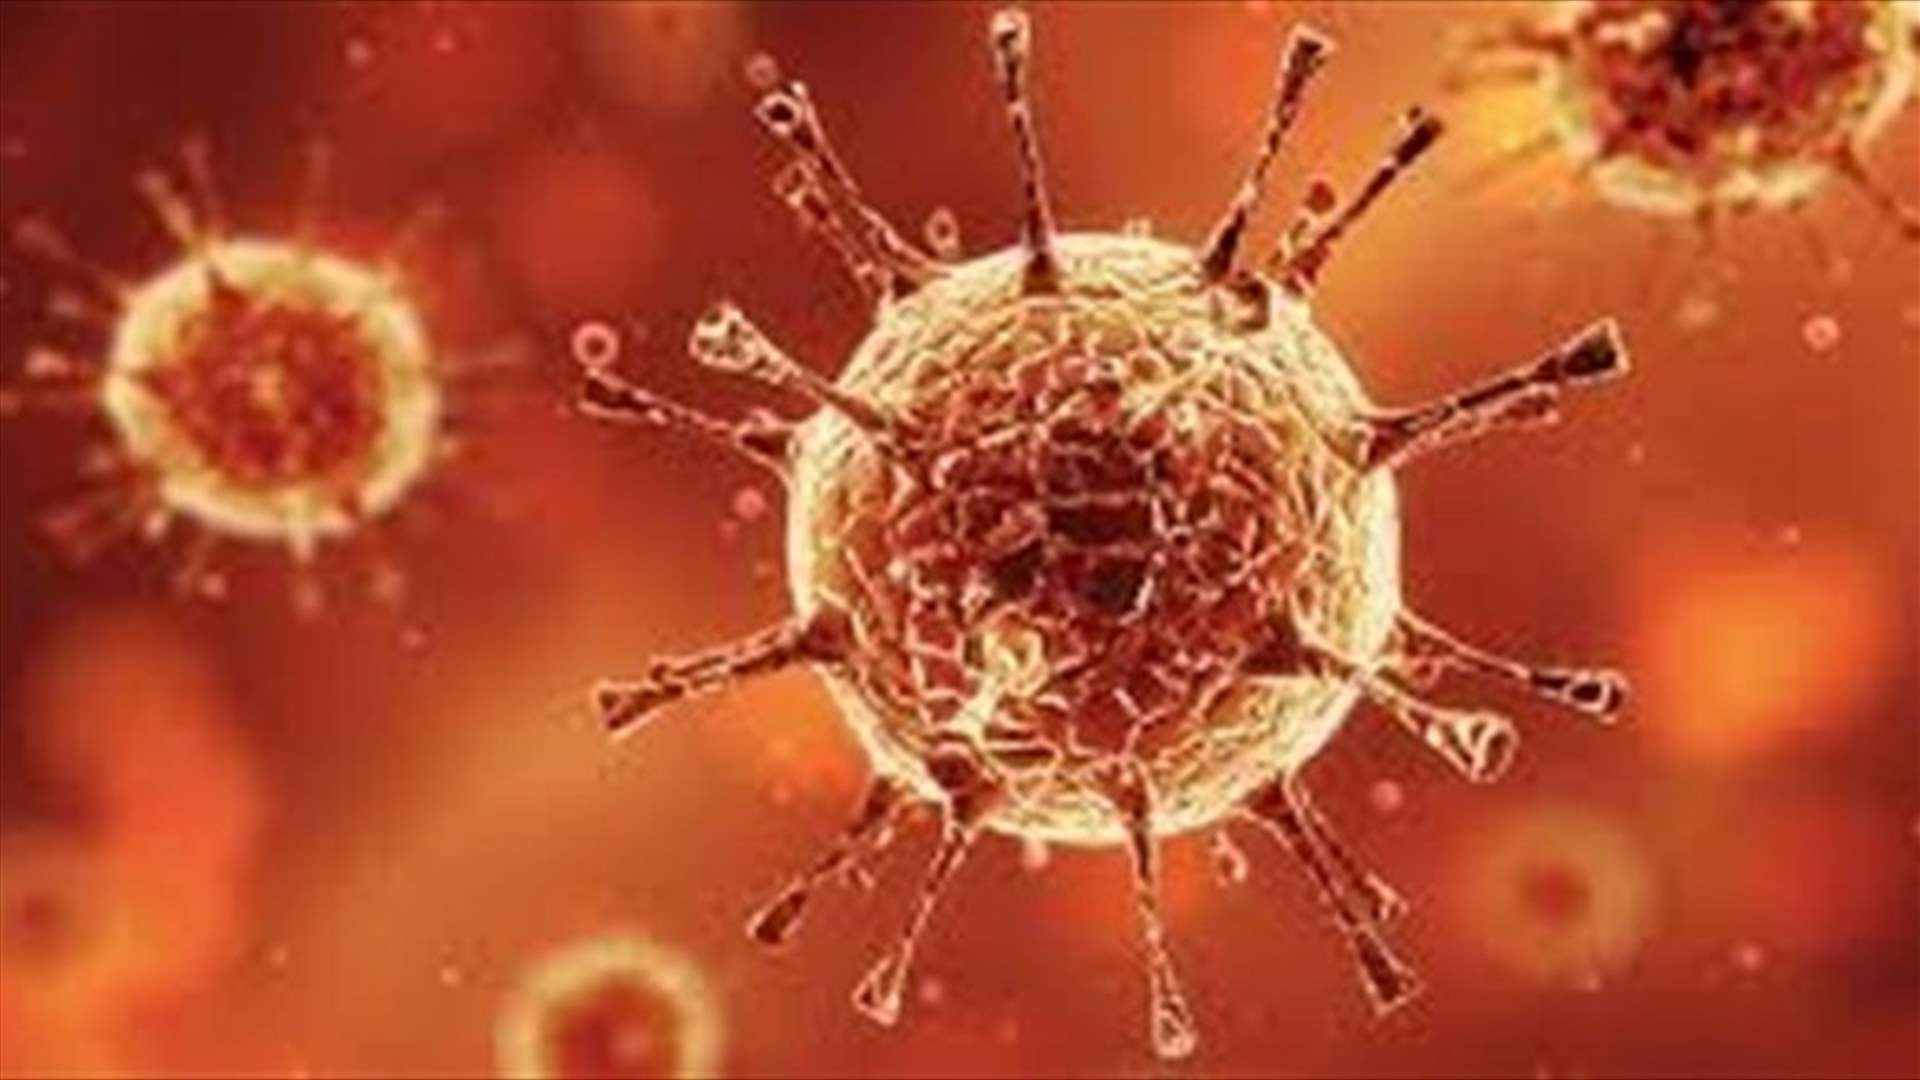 Ministry of Health: 14 new Coronavirus cases, 1 death reported